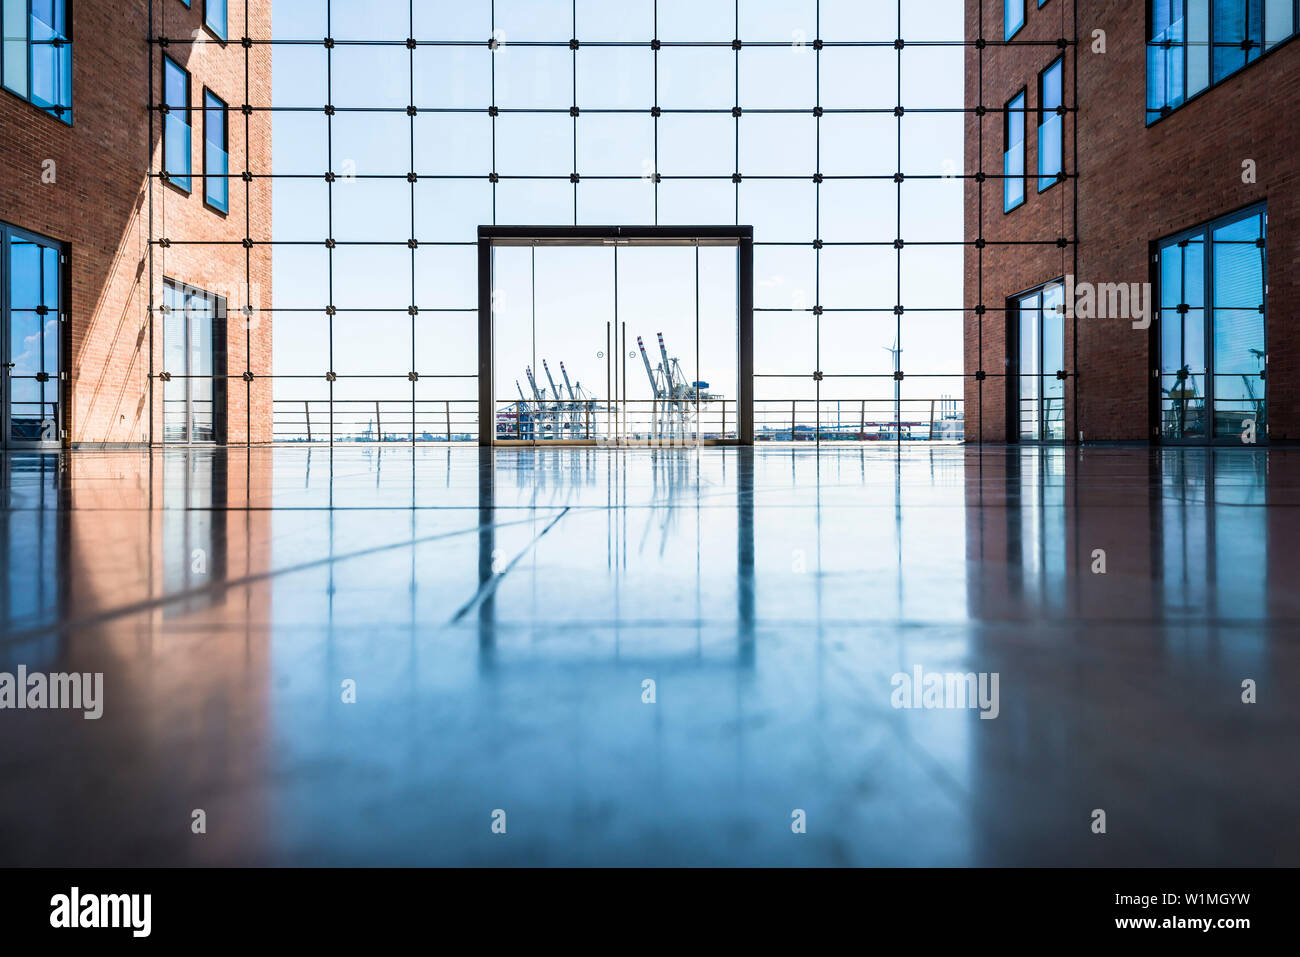 The inner courtyard of the office house Elbflorenz in Grosse Elbstrasse in the old timber harbour with view to container cranes, Hamburg, Germany Stock Photo